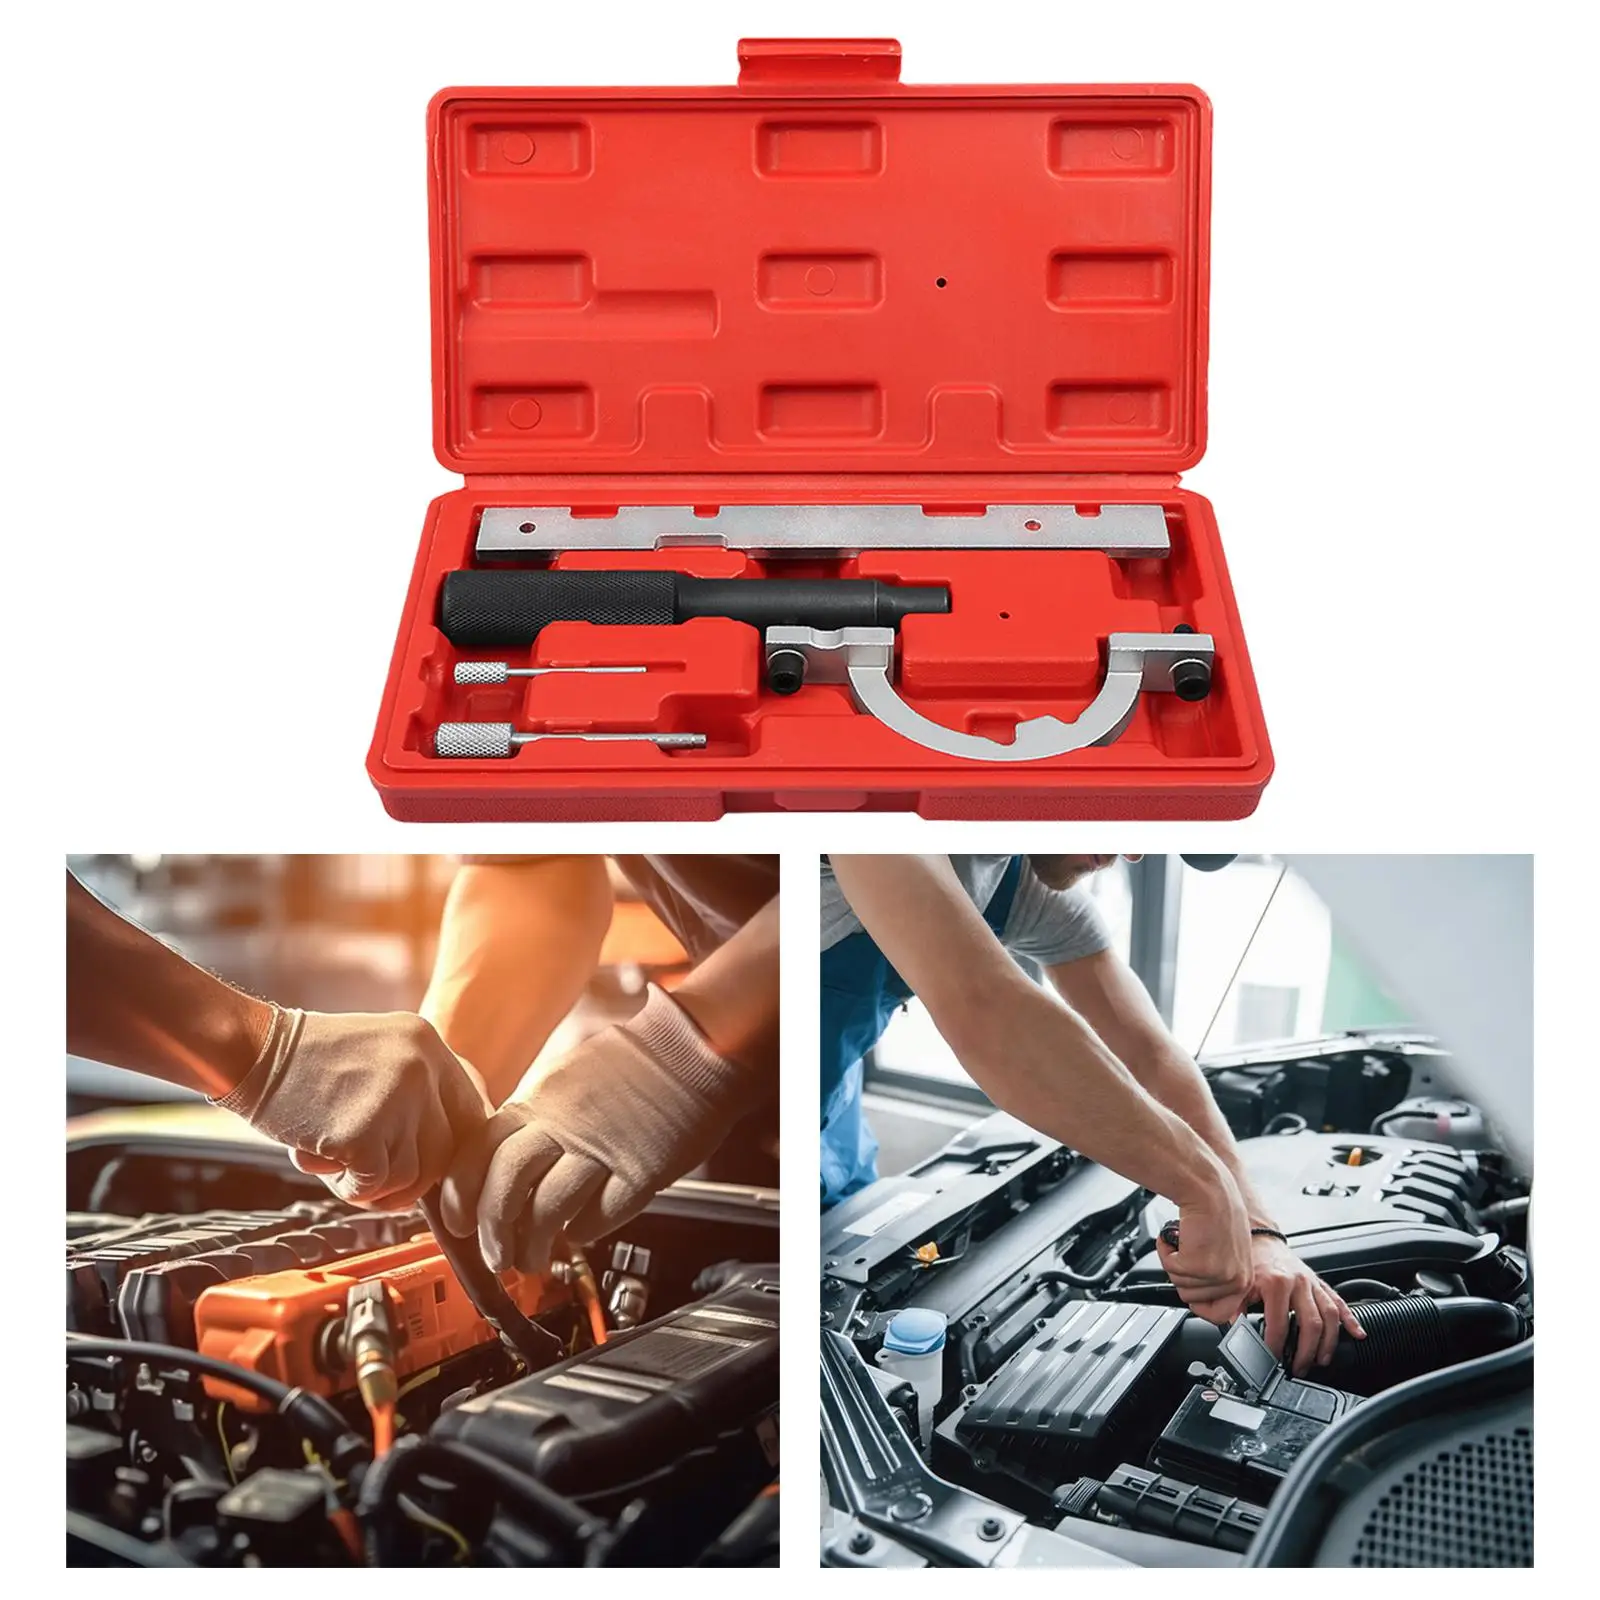 

Engine Locking Timing Tool Kits Manual Tool Wear Resistant Easy Carrying Camshaft Engine Timing Locking Tool for Car Parts